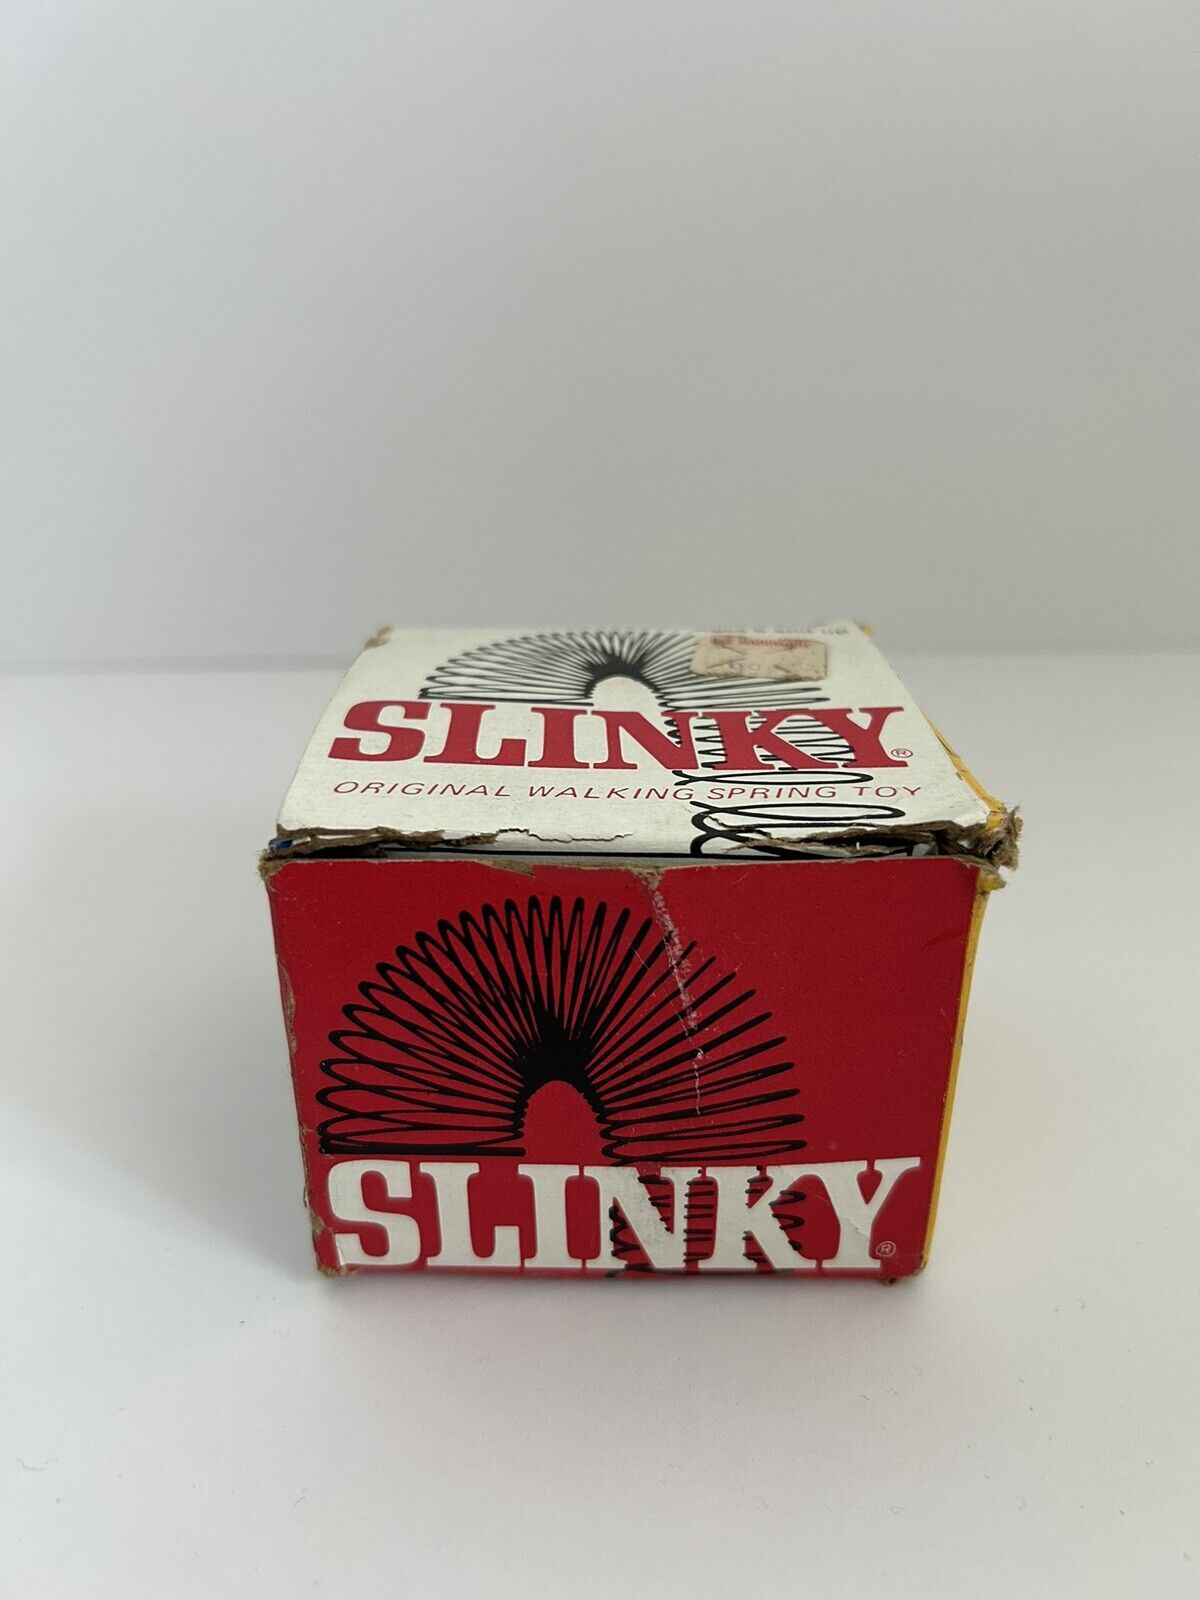 Vintage James Industry\'s Slinky Still In Box 60s. The Names James Toy. FREESHIP